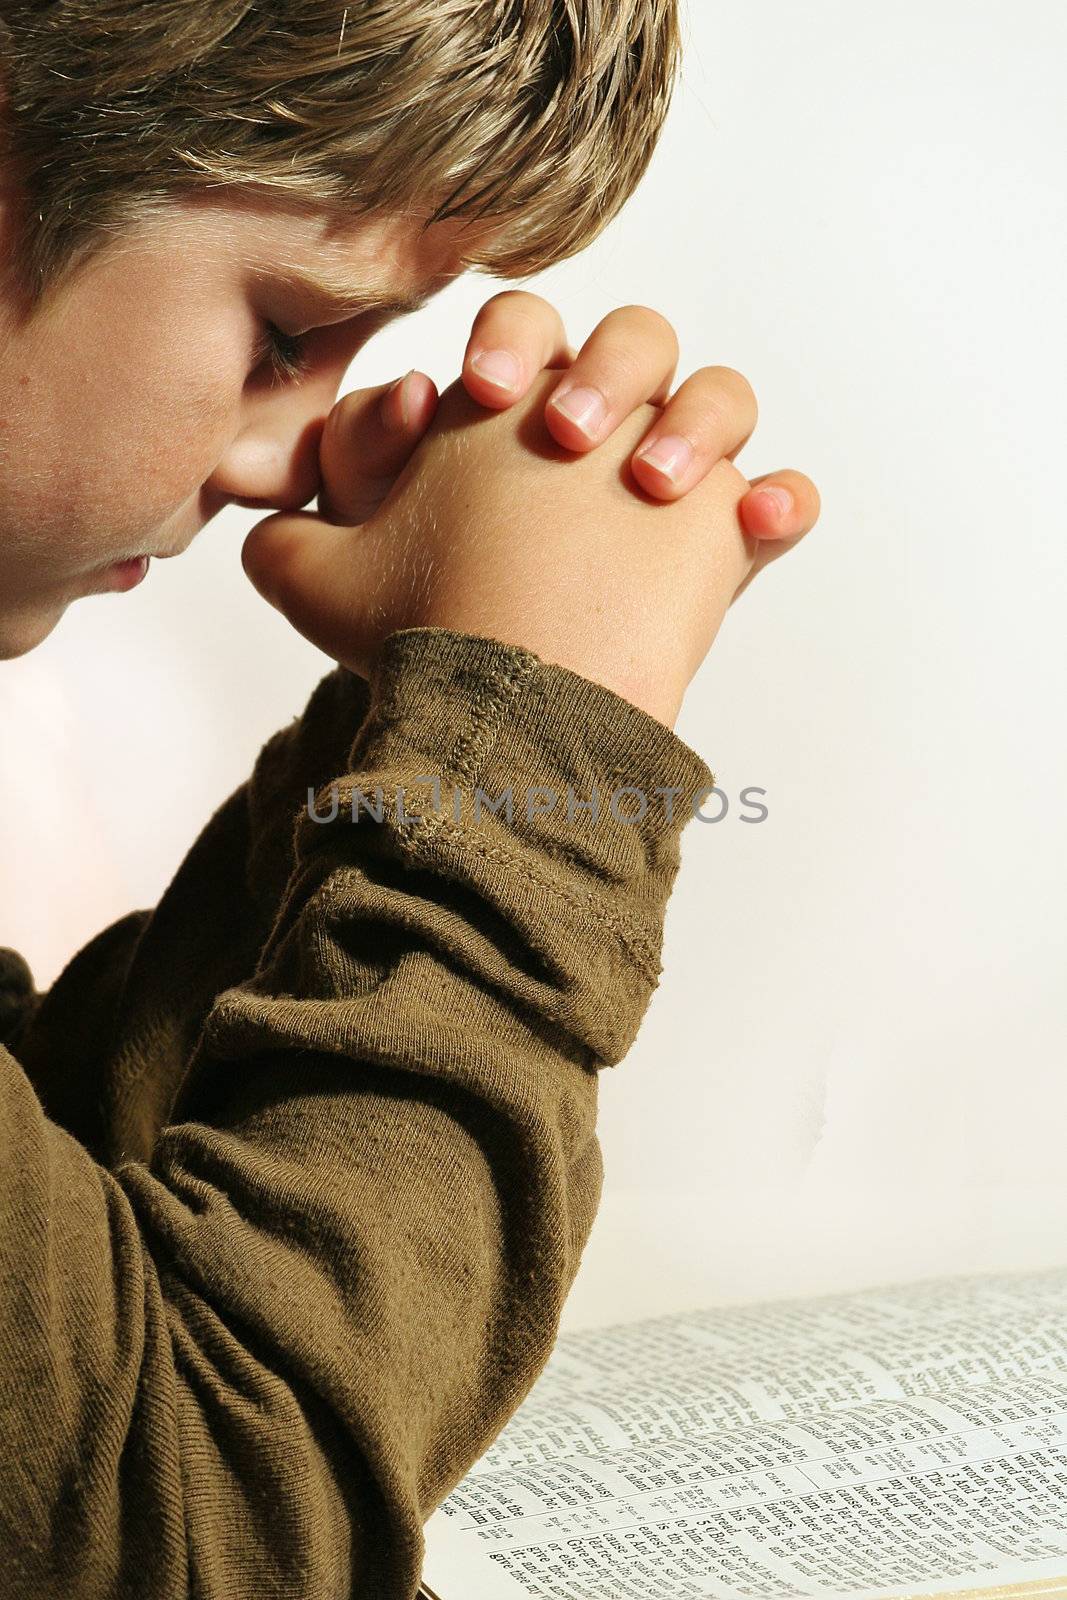 young boy praying over the bible on white by creativestock